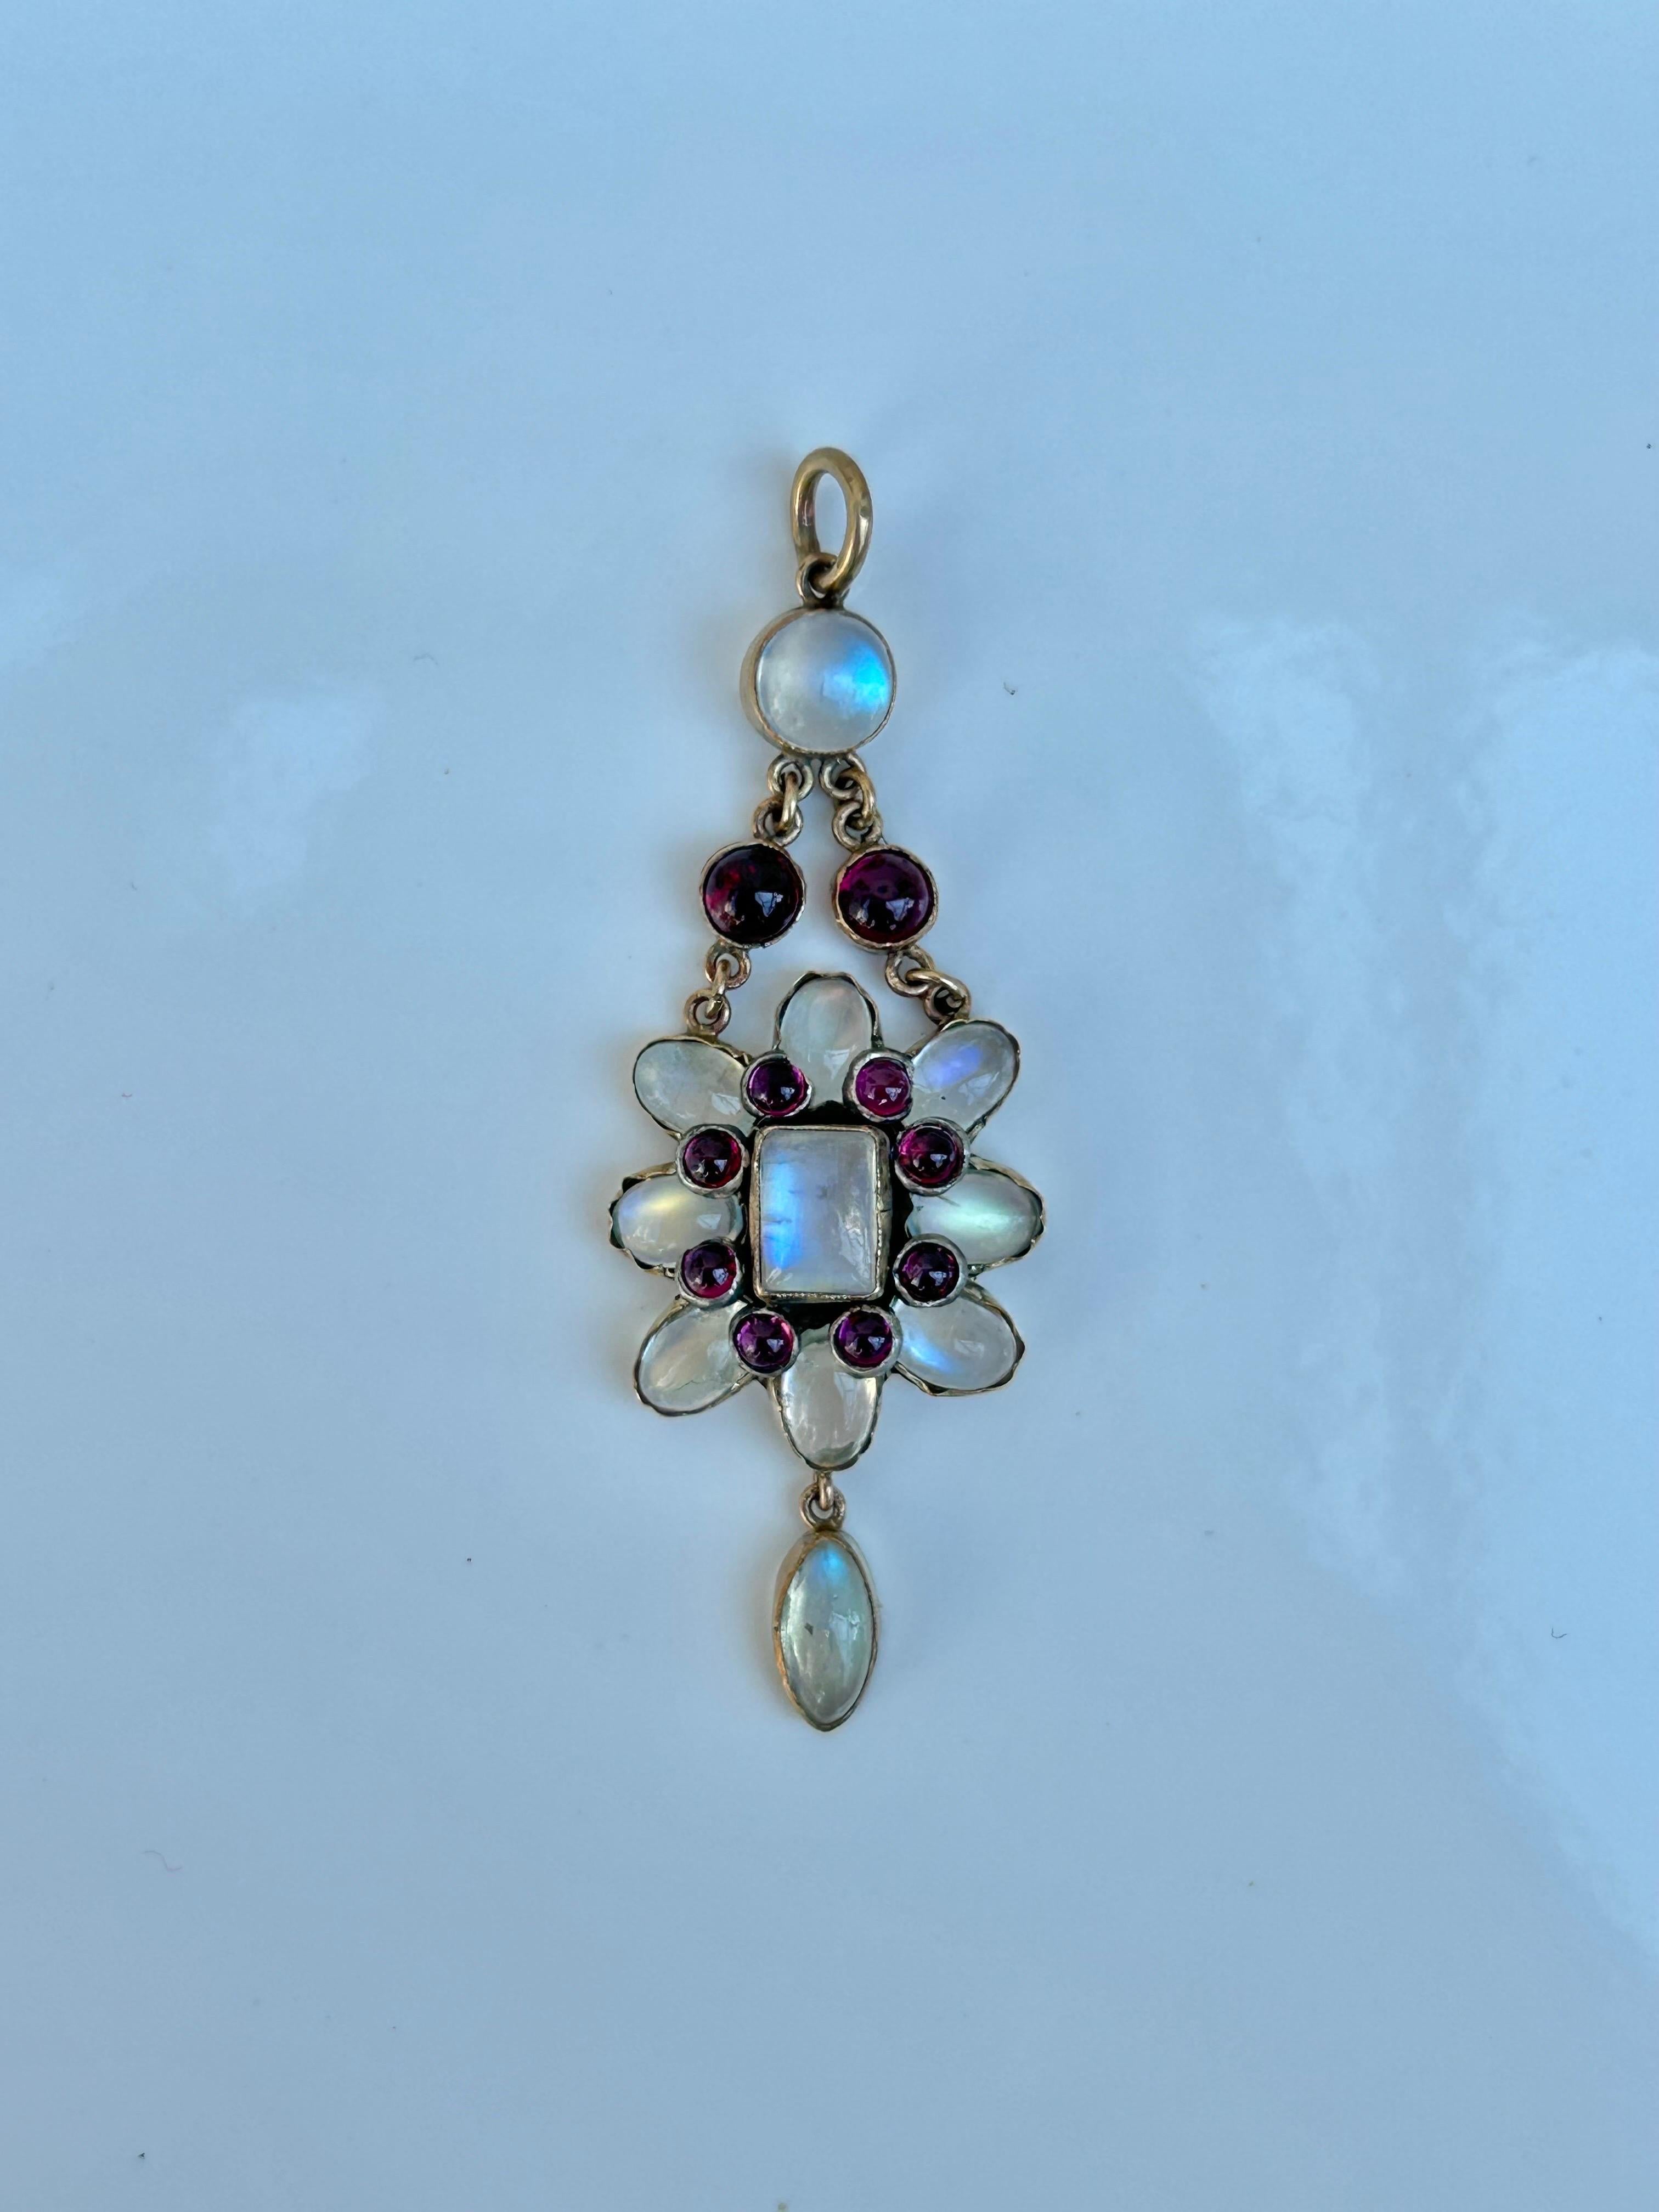 Antique Moonstone and Cabochon Ruby Gold Pendant

The prettiest moonstone and Ruby pendant, truly beautiful!
Chain not included 

The item comes without the box in the photo but will be presented in a Howard’s Antique gift book

Measurements: weight